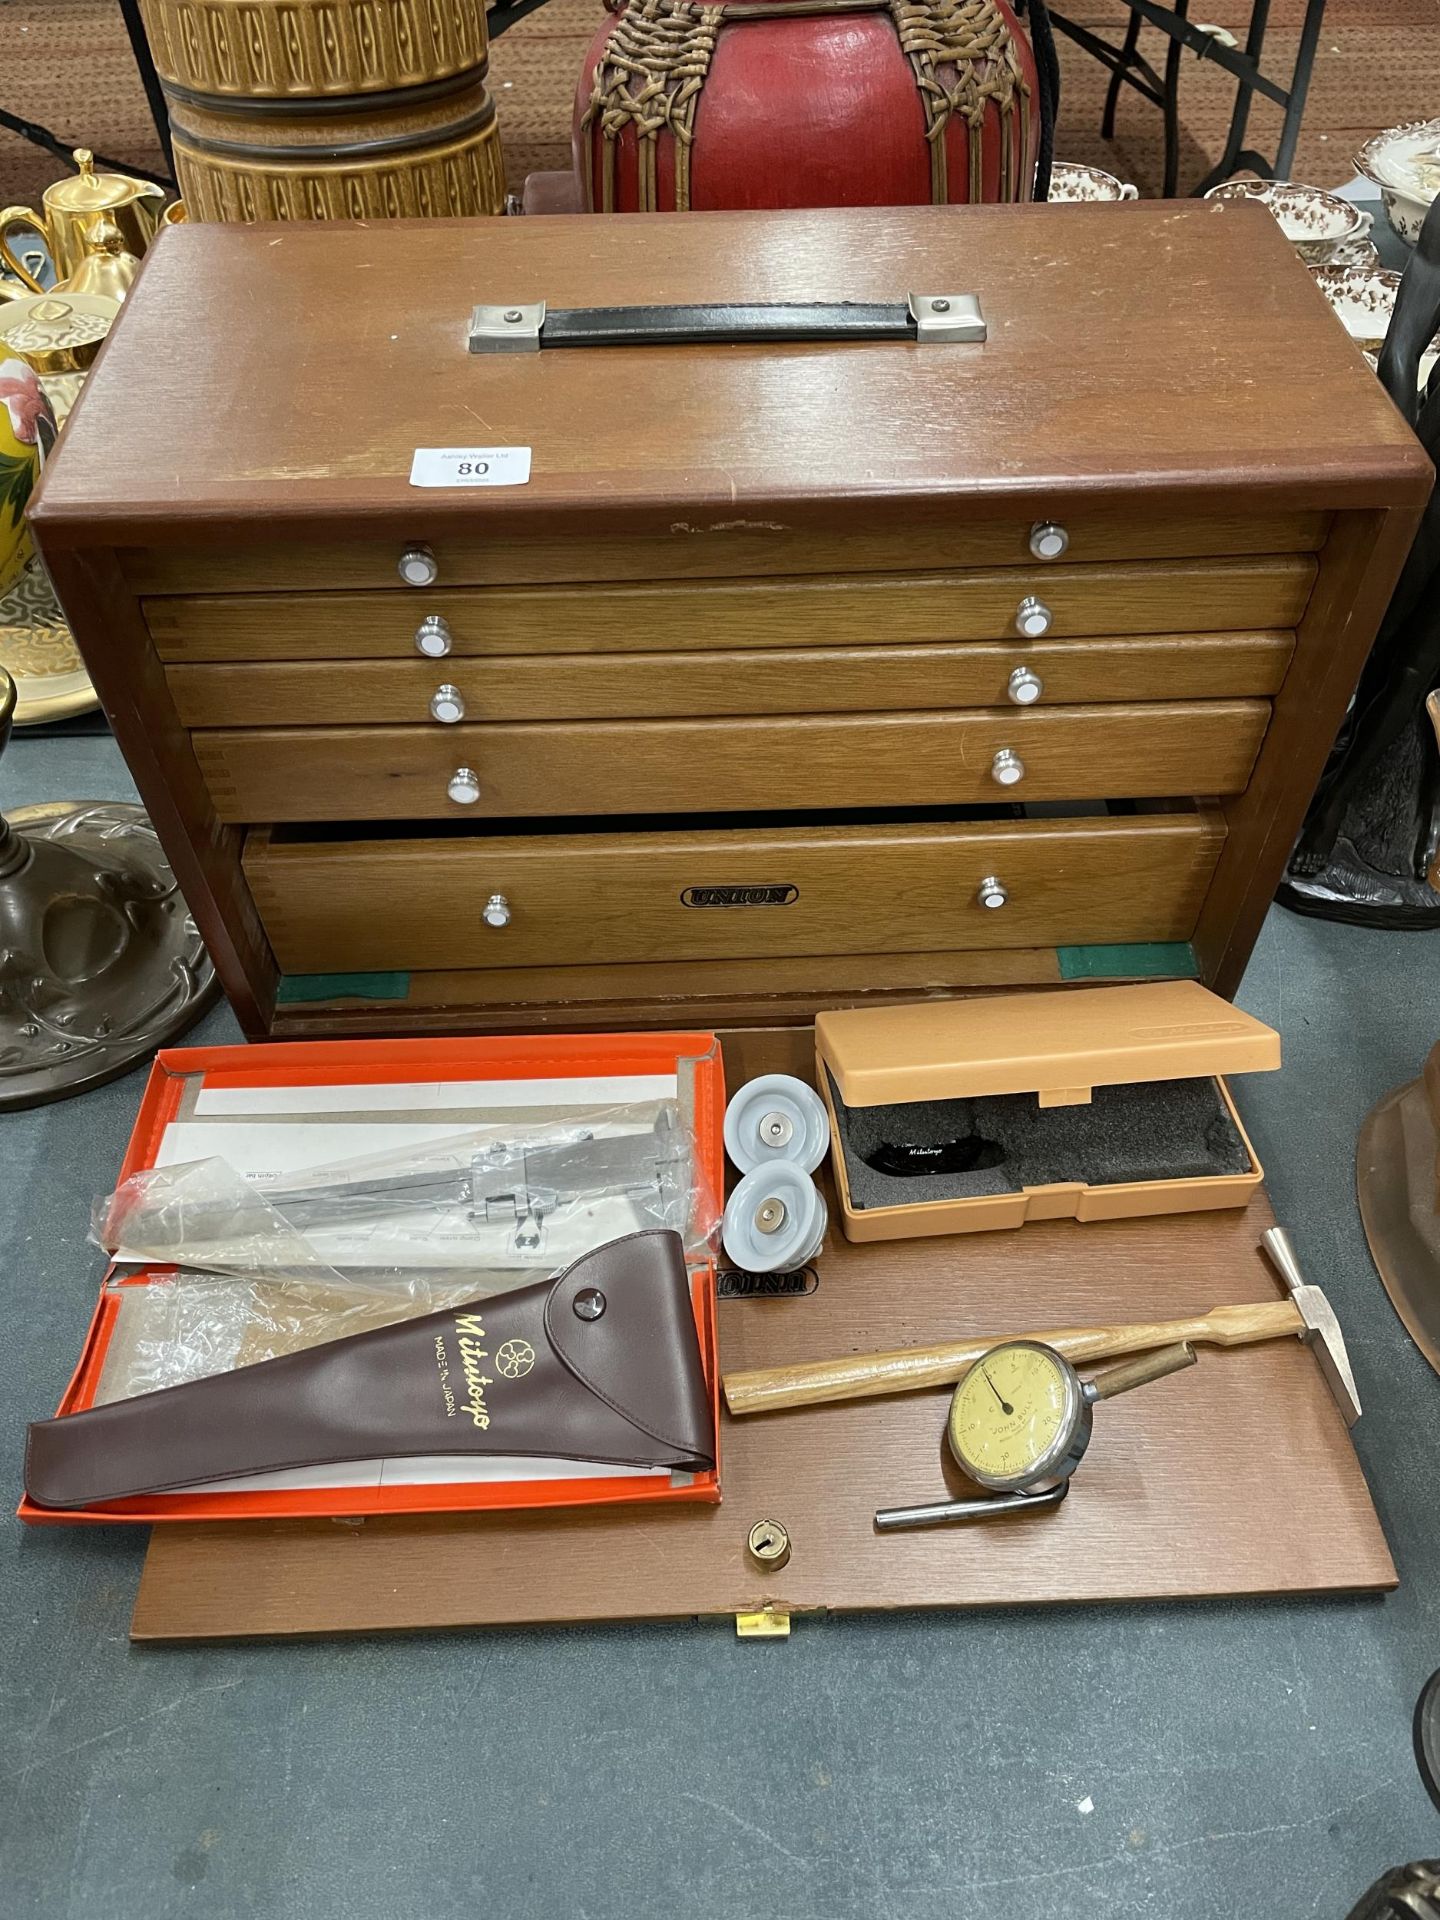 A UNION ENGINEERS CHEST WITH FIVE GRADUATED DRAWERS AND TOOLS TO INCLUDE GAUGES, CALIPERS, HAMMER